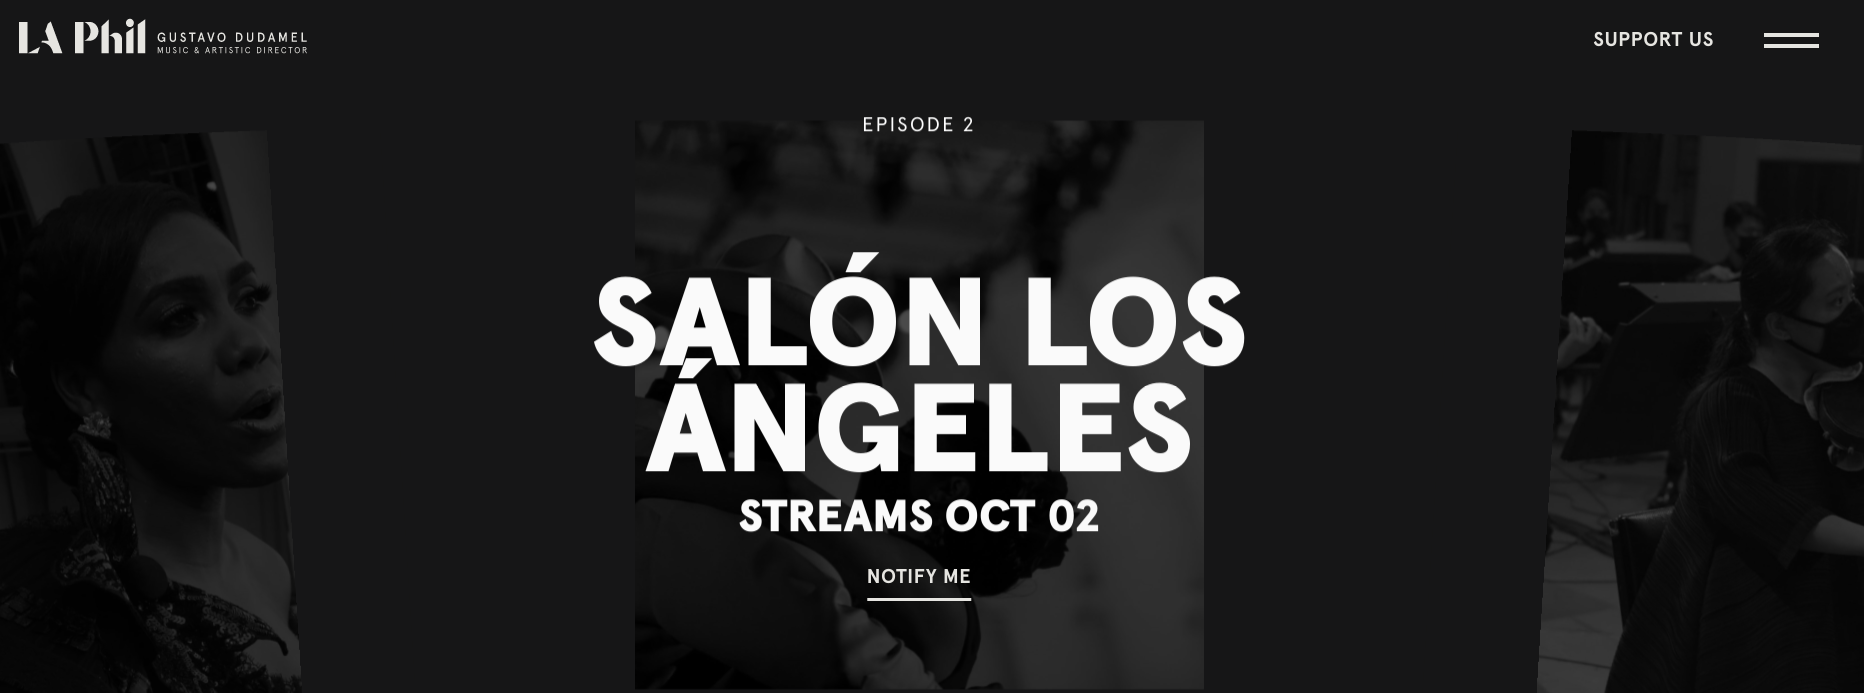 EPISODE 2: OCT 2 Salón Los Ángeles Featuring two composers who adapted popular dance music for the symphonic concert hall, this episode offers pianist Jean-Yves Thibaudet in Rhapsody in Blue and Arturo Márquez and Gustavo Dudamel paying tribute to the history of Salón Los Ángeles, the oldest dance hall in Mexico City.  Los Angeles Philharmonic Gustavo Dudamel, conductor Jean-Yves Thibaudet, piano  Arturo MÁRQUEZ  Danzon No. 1 GERSHWIN  Rhapsody in Blue